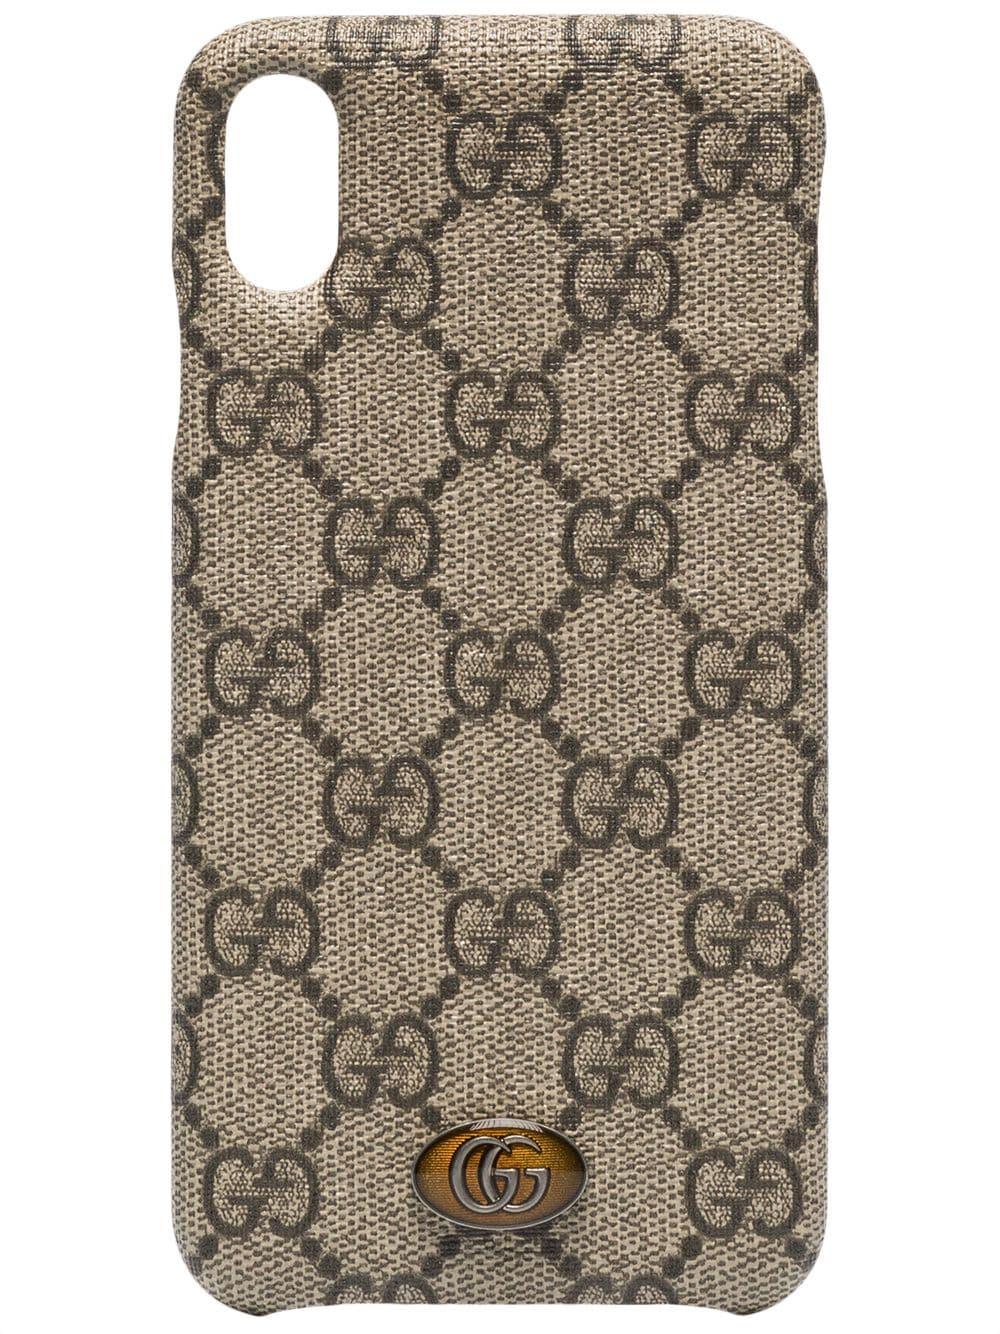 Gucci Canvas Ophidia Iphone 8 Plus Case in Brown | Lyst